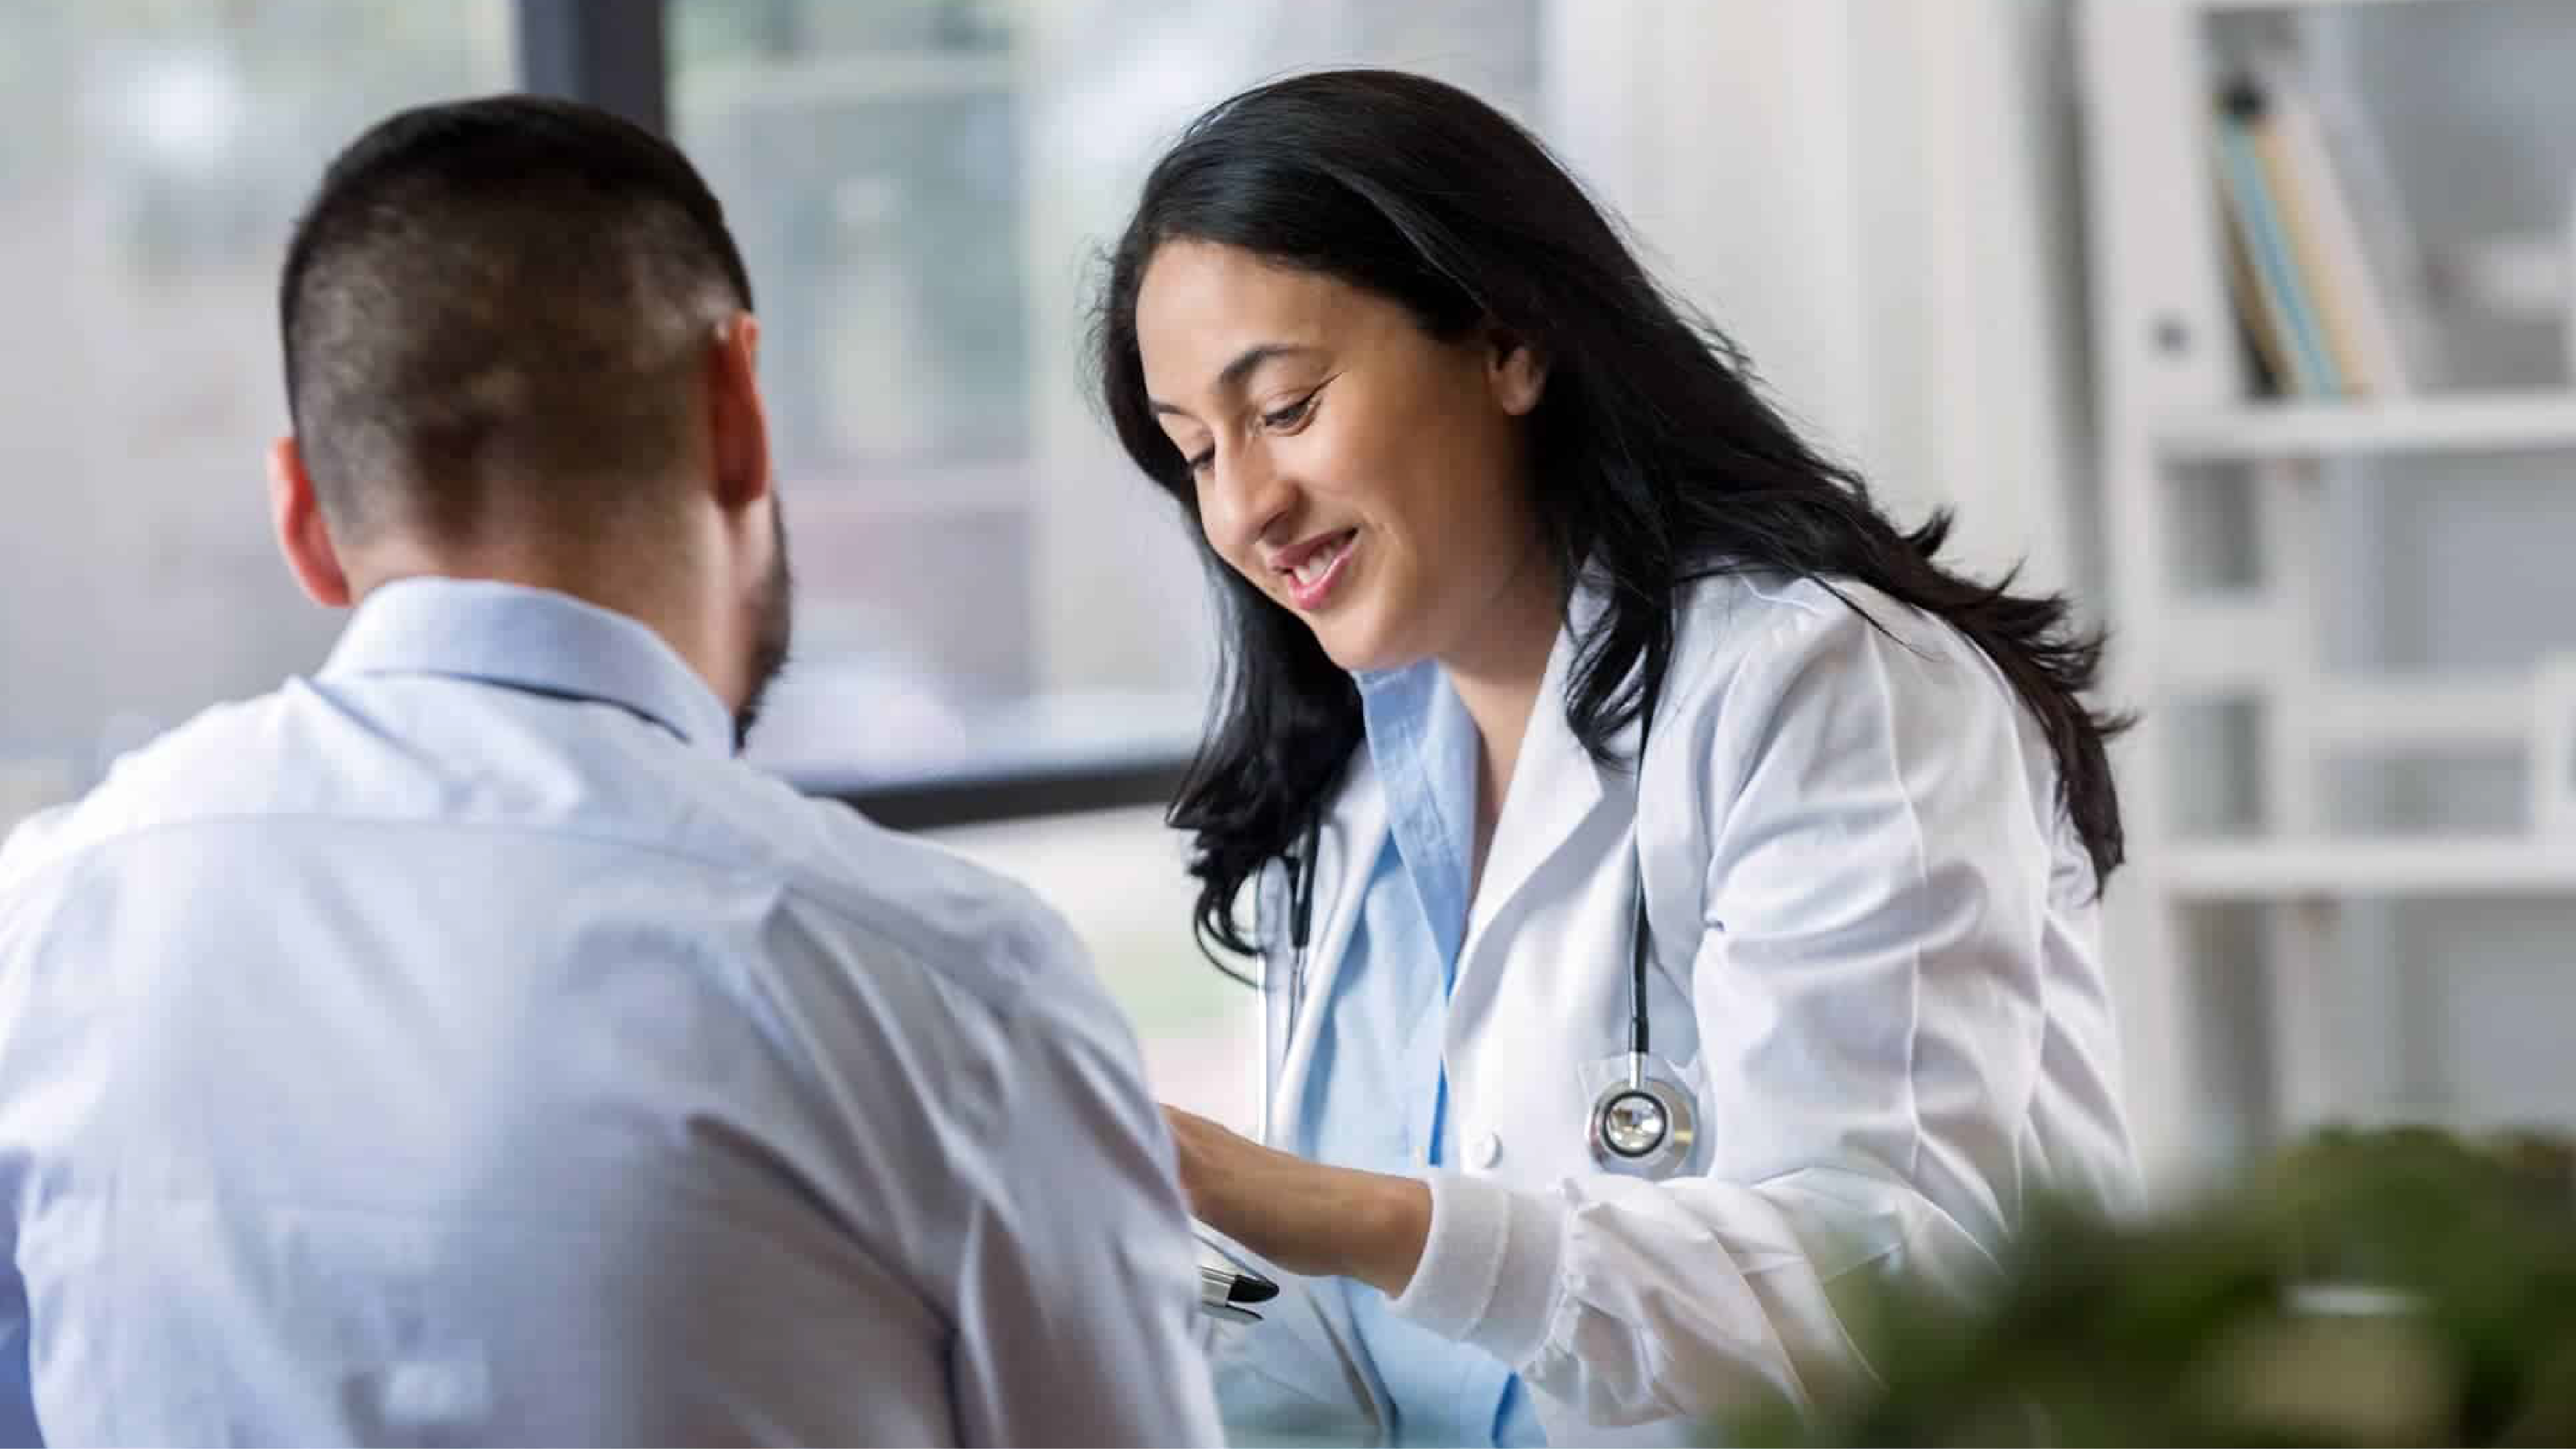 A health care provider talking to a patient. Both are looking at something the provider is holding.